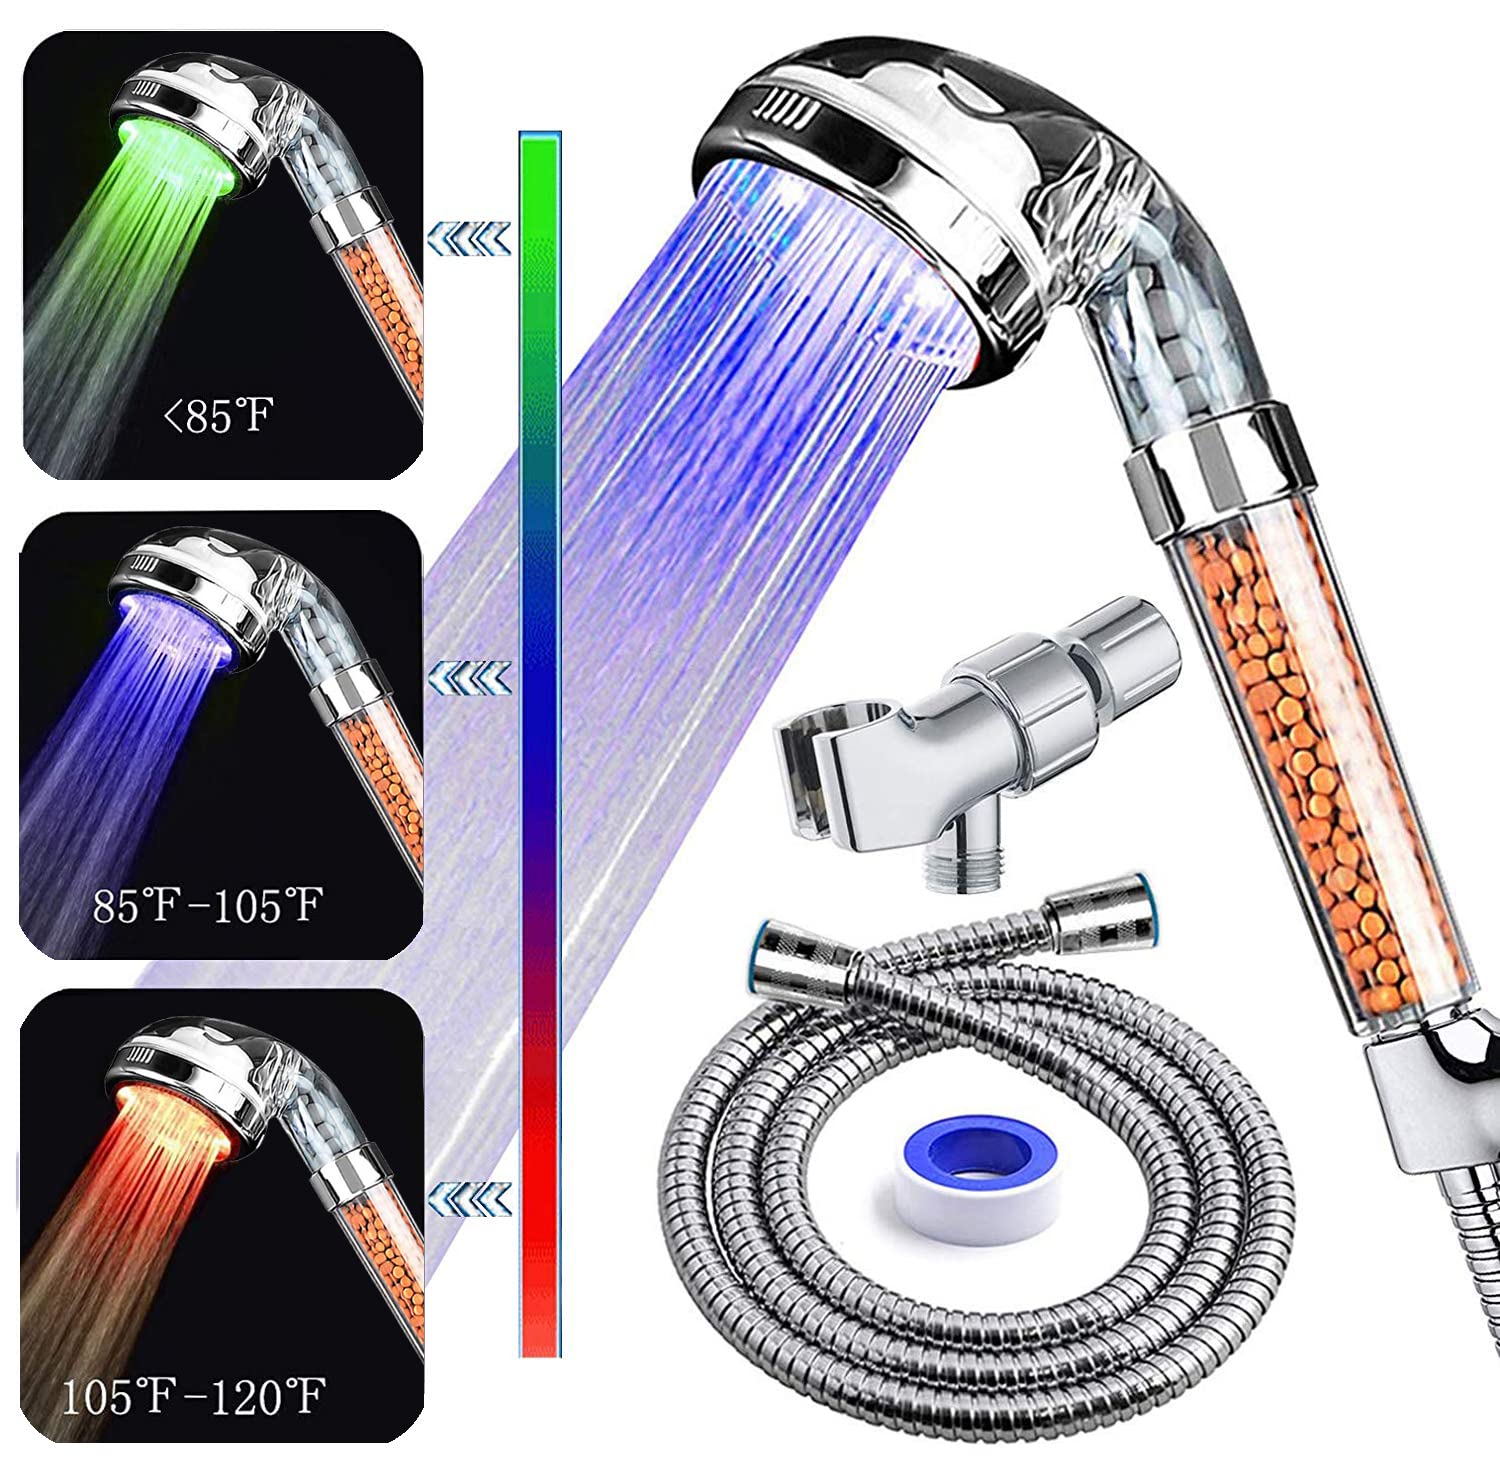 PRUGNA LED Shower Head with Hose and Shower Arm Bracket, High-Pressure Filter Handheld Shower for Repair Dry Skin and Hair Loss - Color Changes with Water Temperature